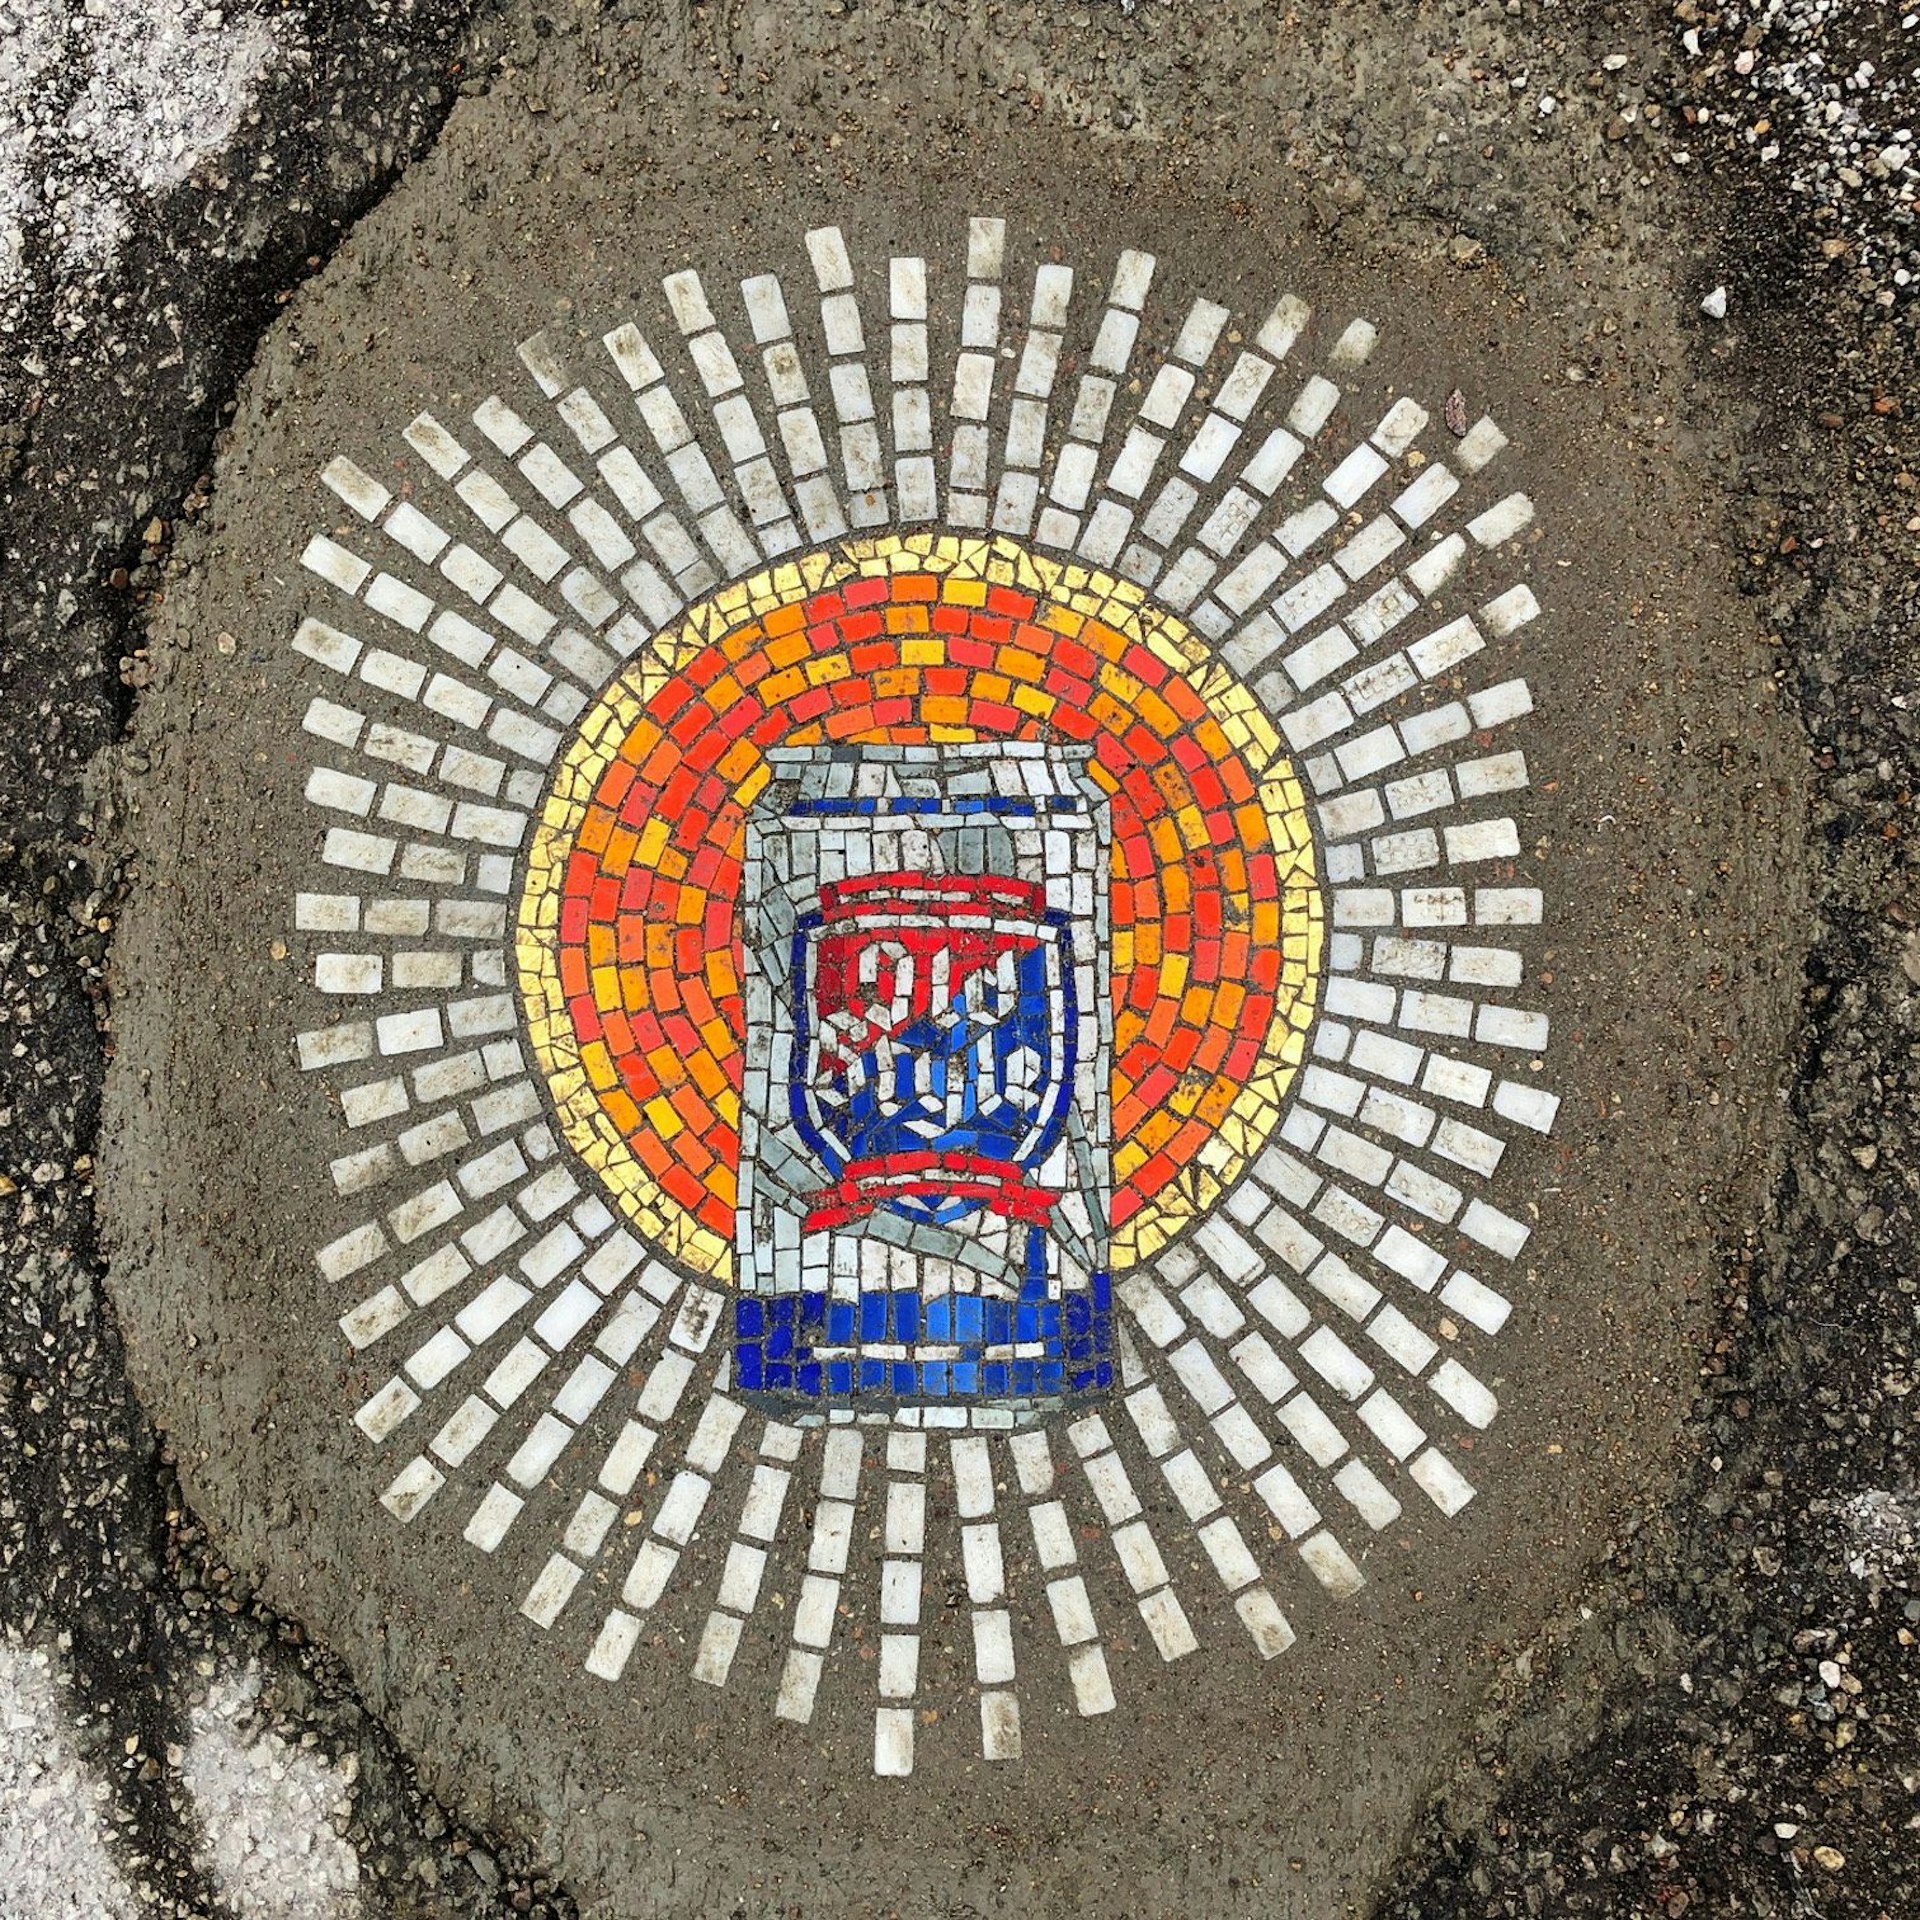 A mosaic depicting a red, blue, and silver can of Old Style lager is surrounded by an orange and yellow hallow and white lines of light in the pavement of a Chicago pothole